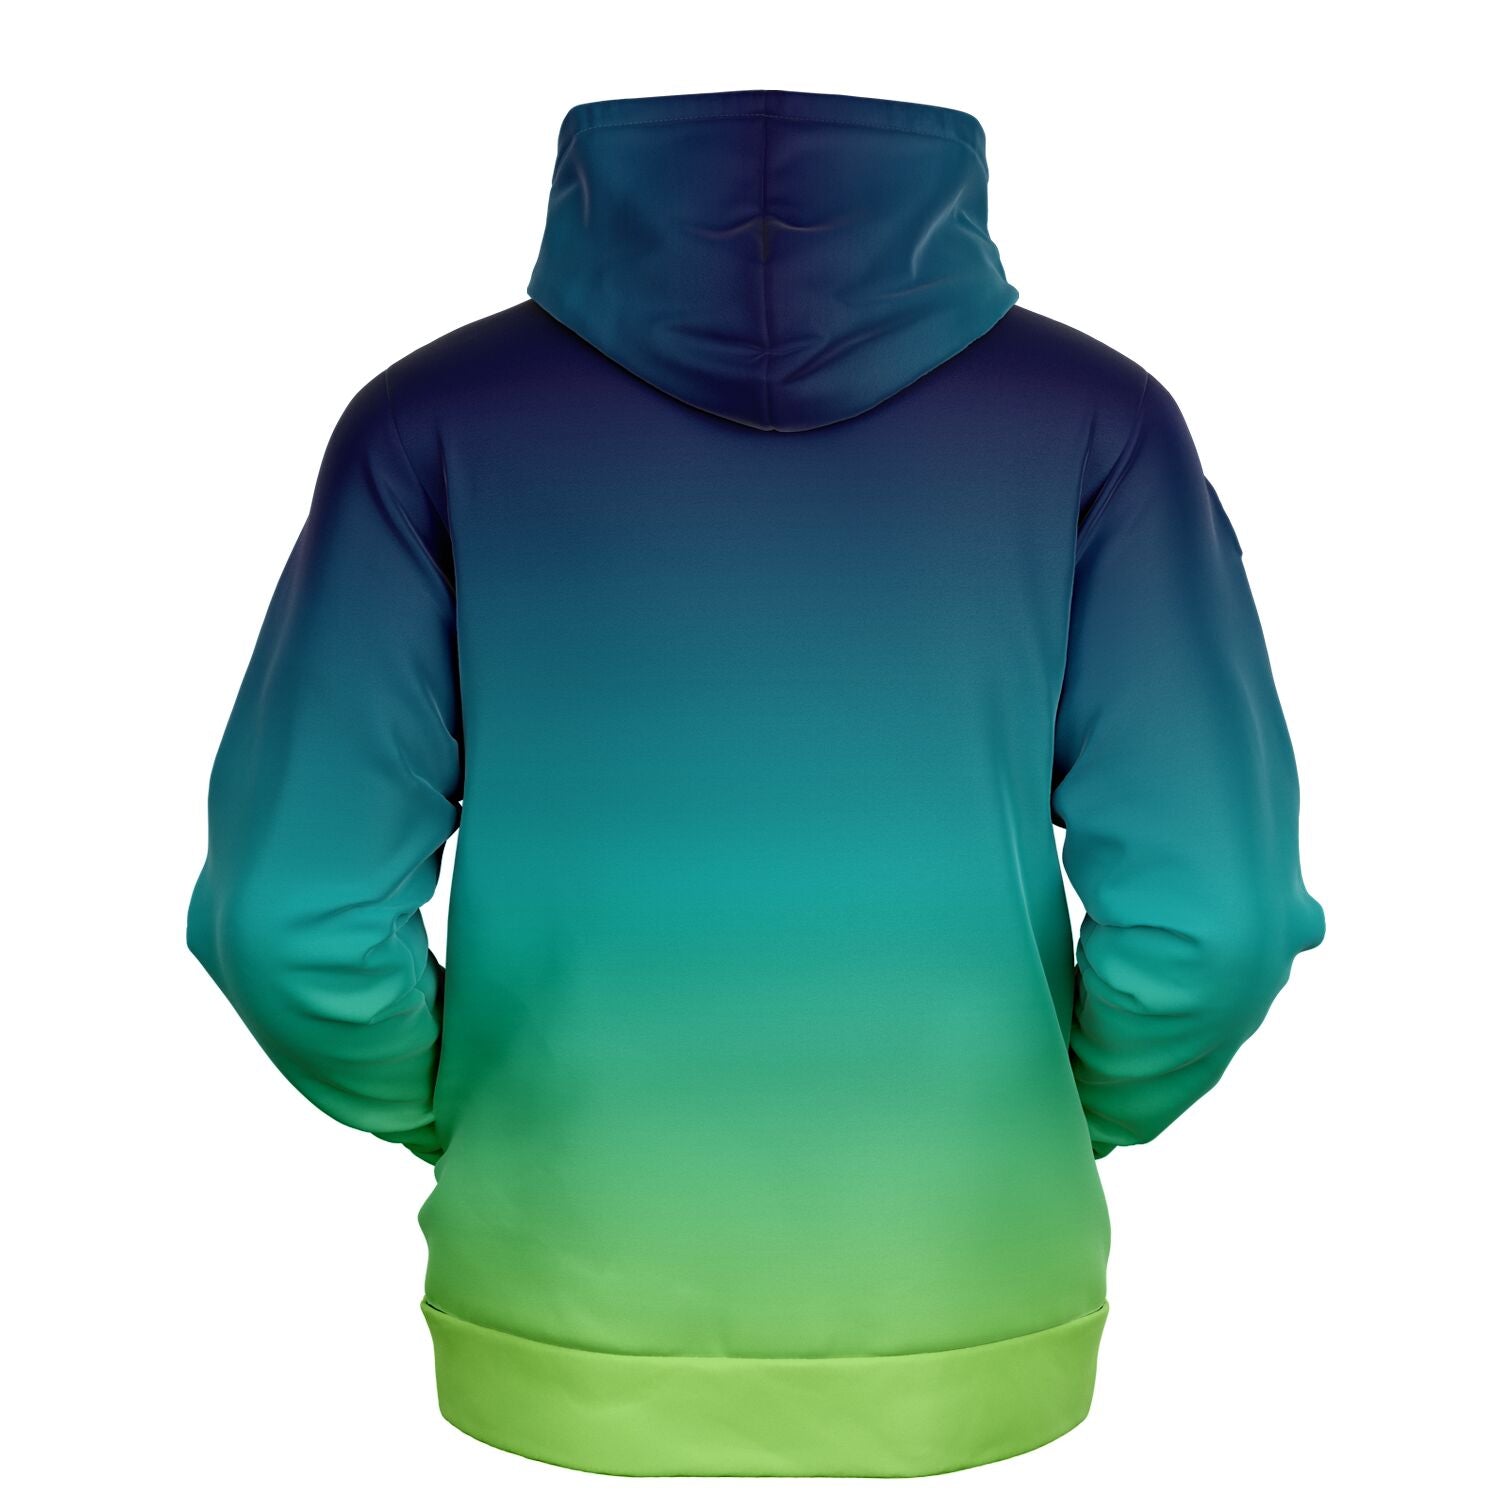 Blue and Green Ombre Hoodie, Tie Dye Gradient Pullover Men Women Adult Aesthetic Graphic Hooded Sweatshirt with Pockets Starcove Fashion